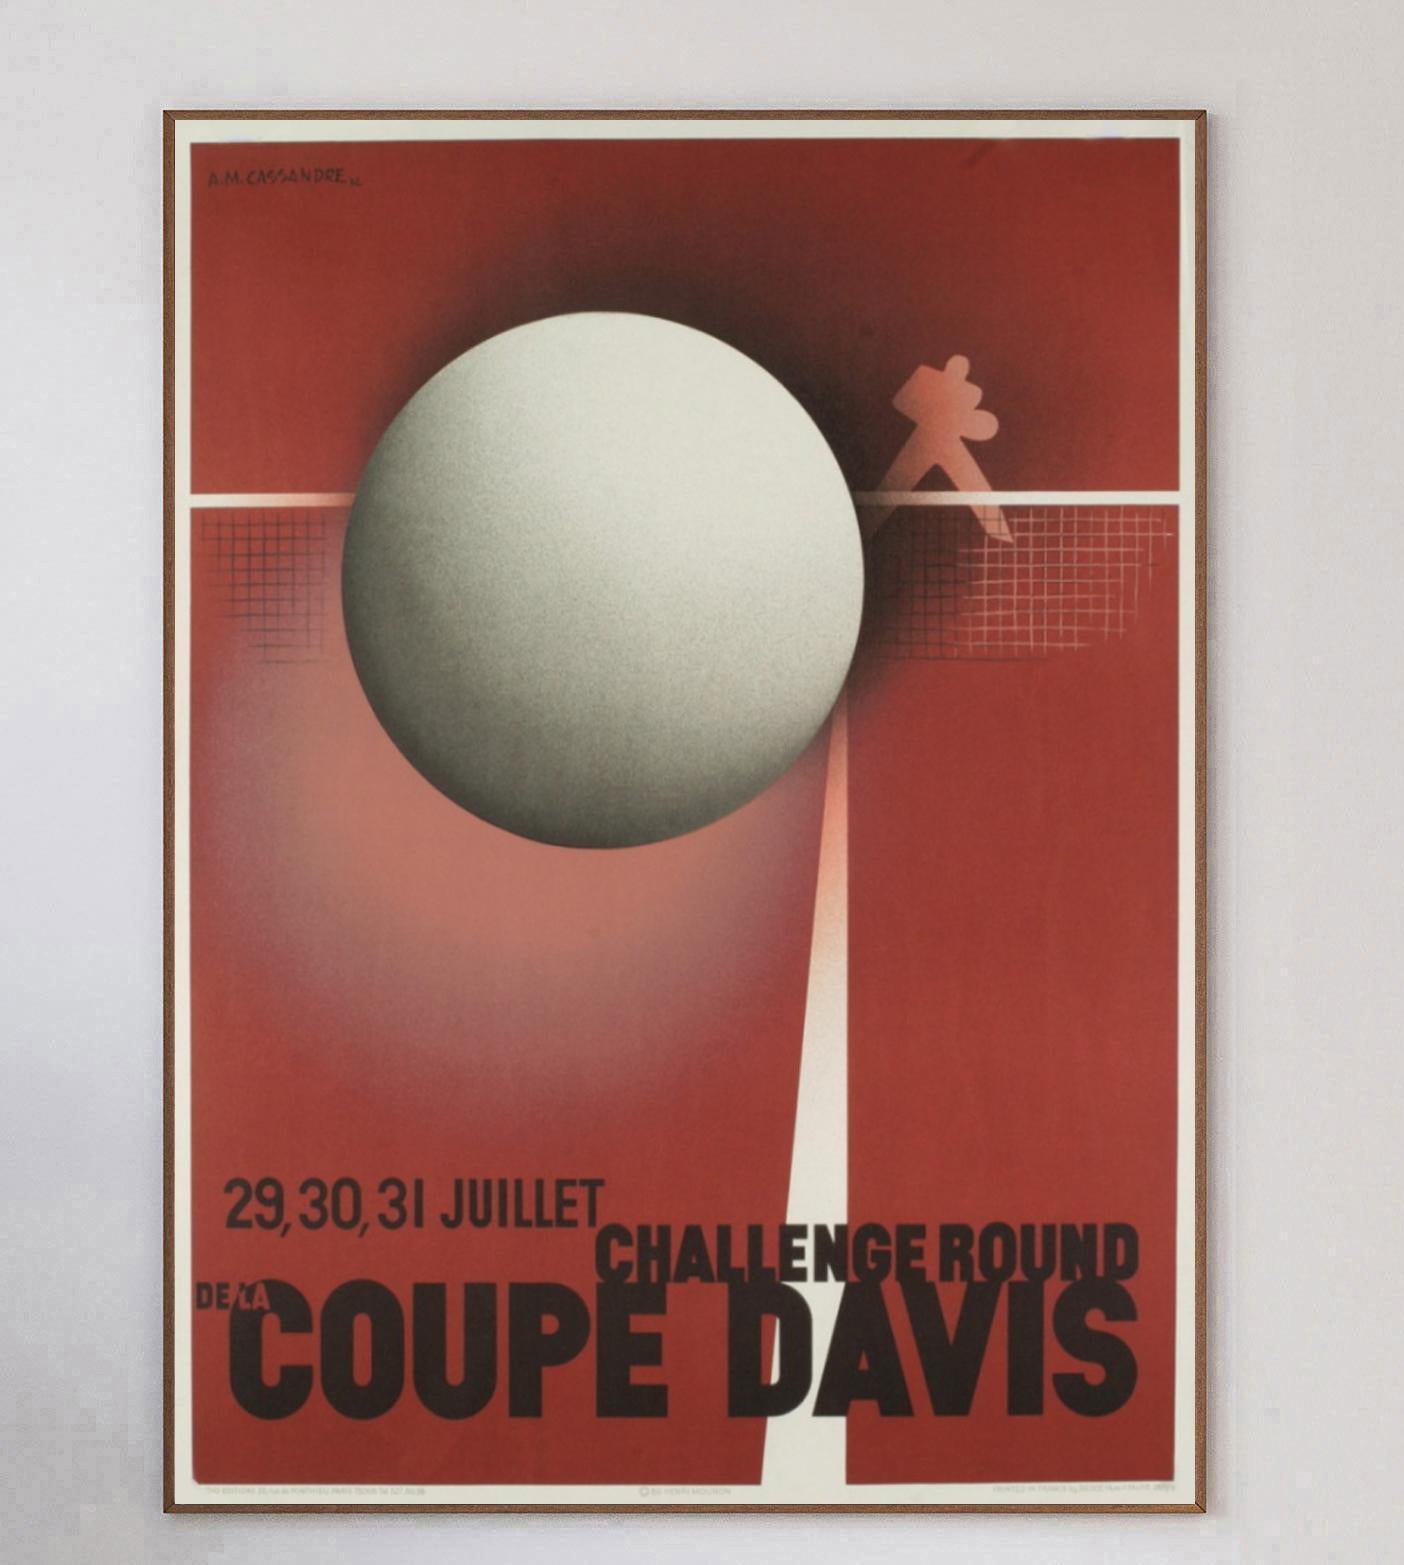 Regarded as one of the all time great graphic designers, French-Ukrainian great A.M. Cassandre designed this poster for the Coupe Davis, or Davis Cup in 1932. In typical art deco style using scale and lighting to brilliant effect, this beautiful